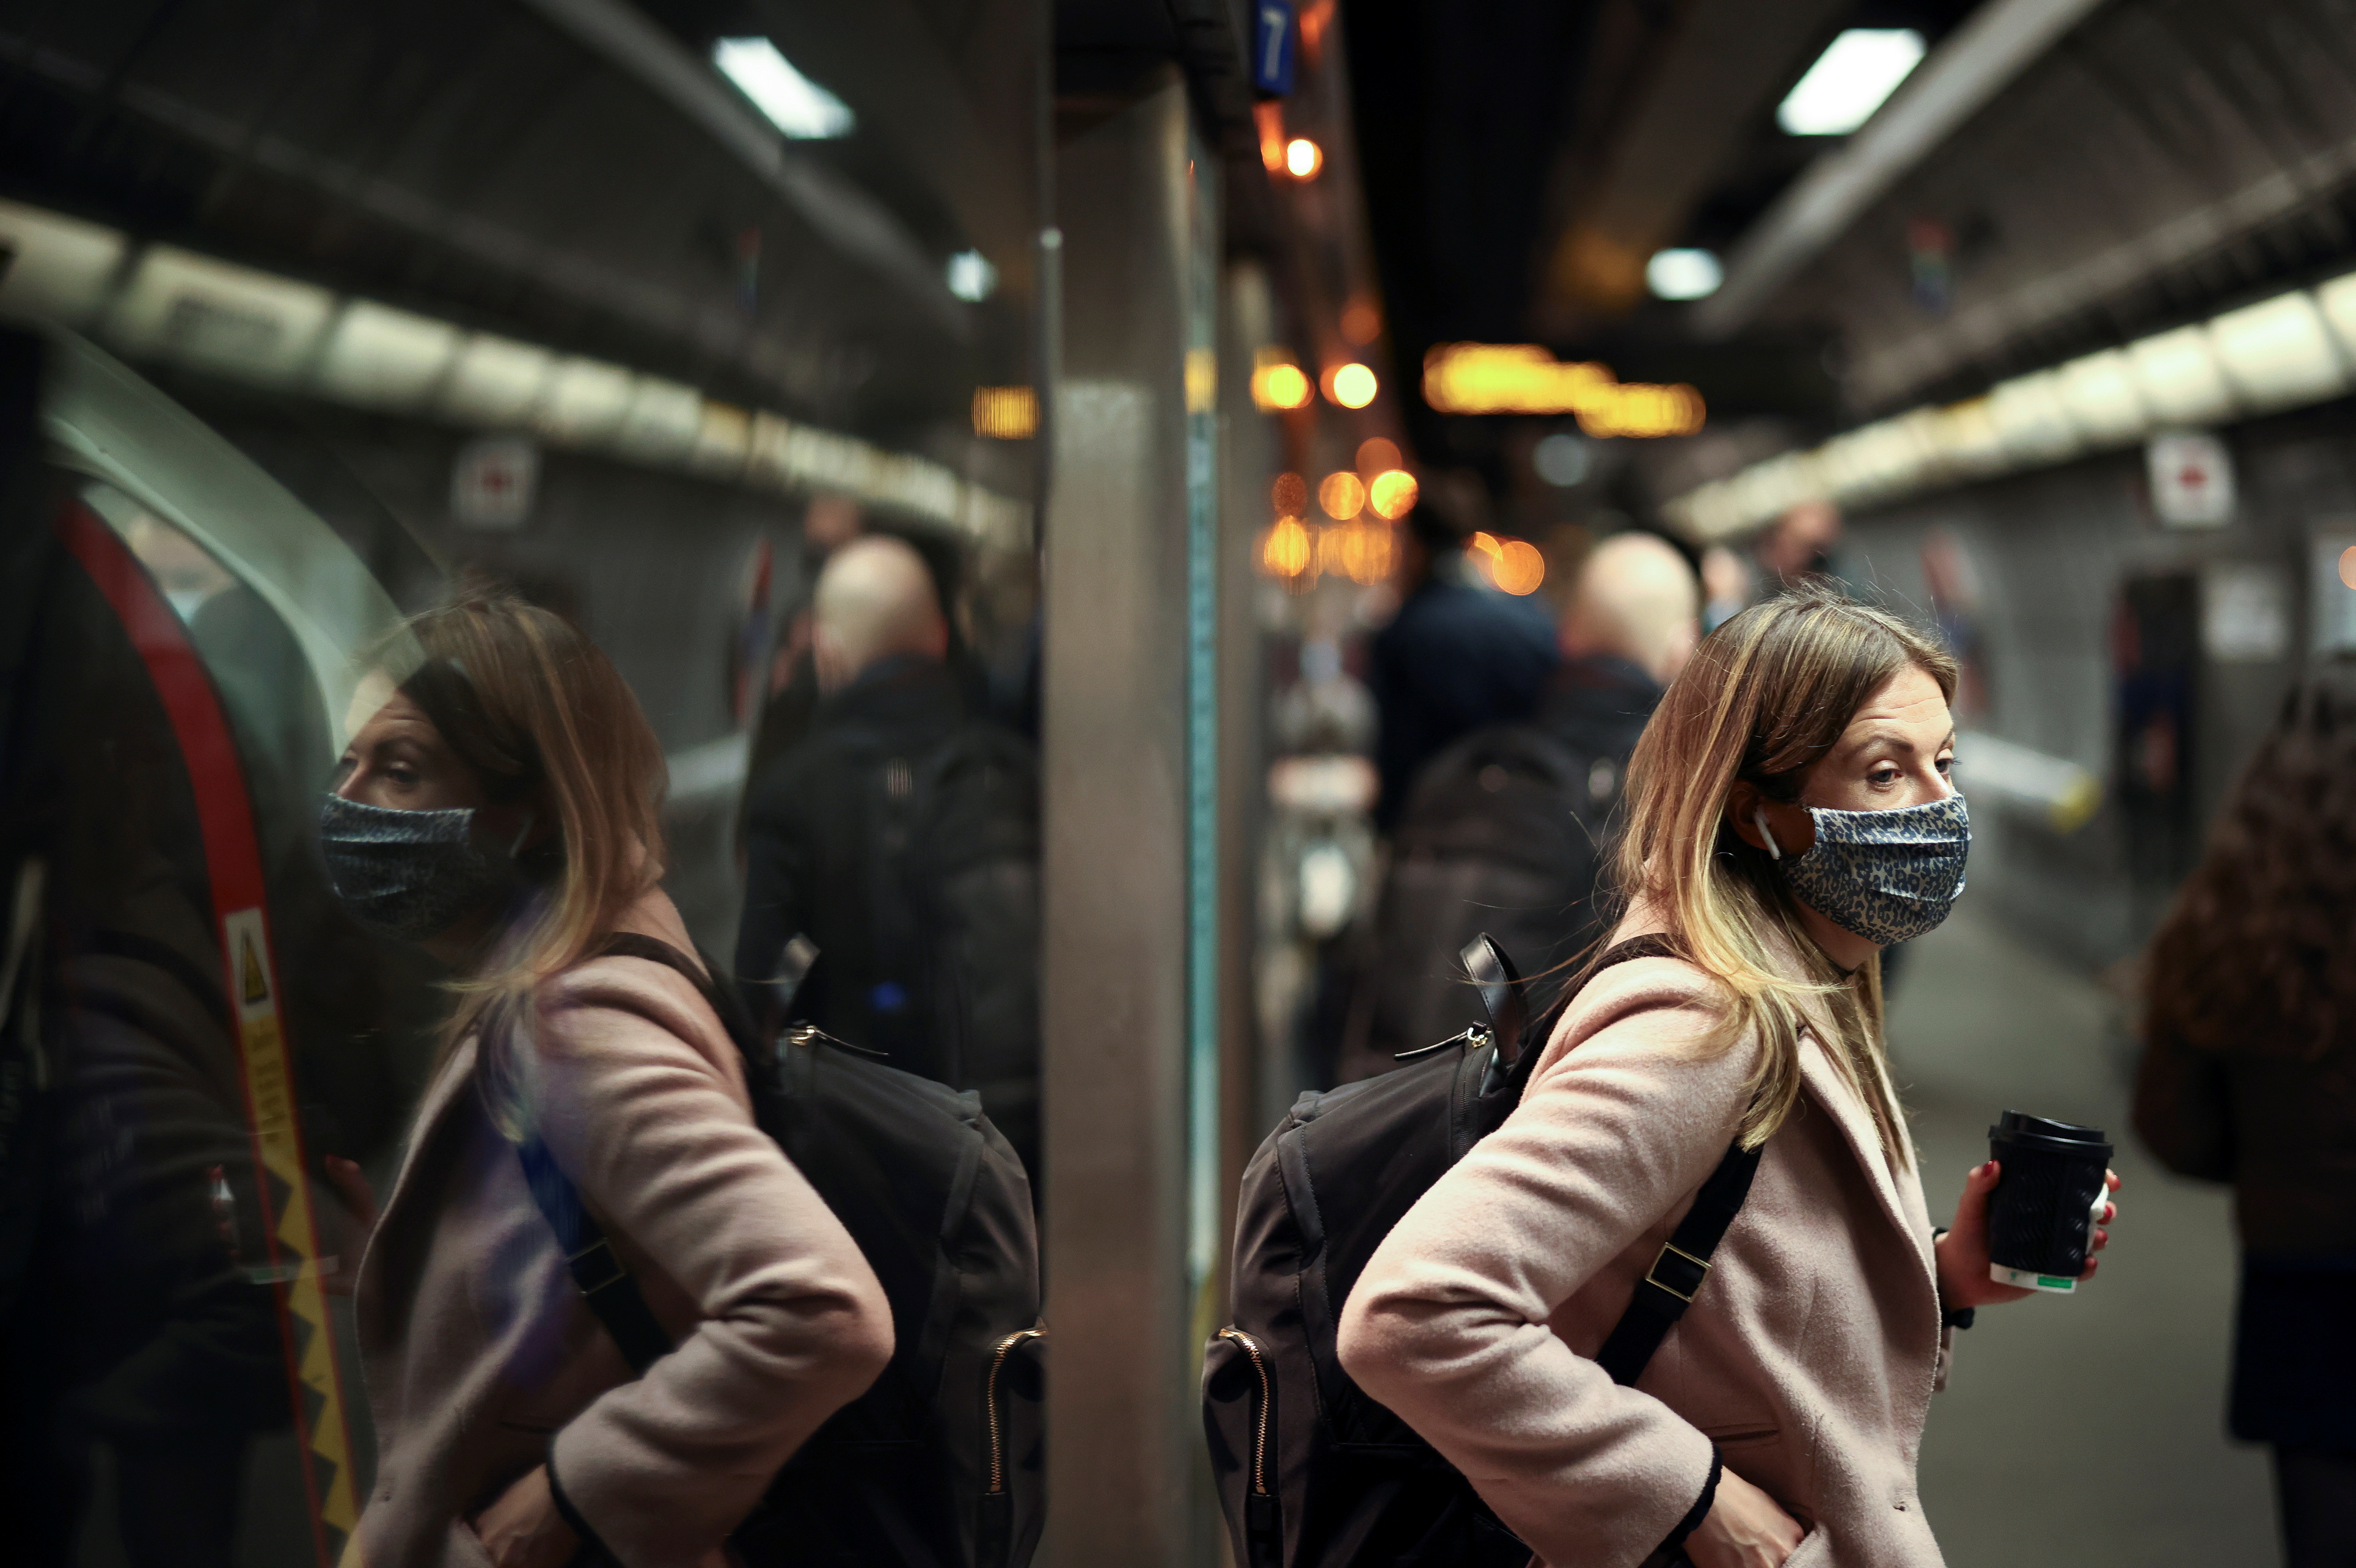 A person exits a train at Westminster Underground station during morning rush hour, amid the coronavirus disease (COVID-19) outbreak in London, Britain, December 1, 2021. REUTERS/Henry Nicholls/file photo